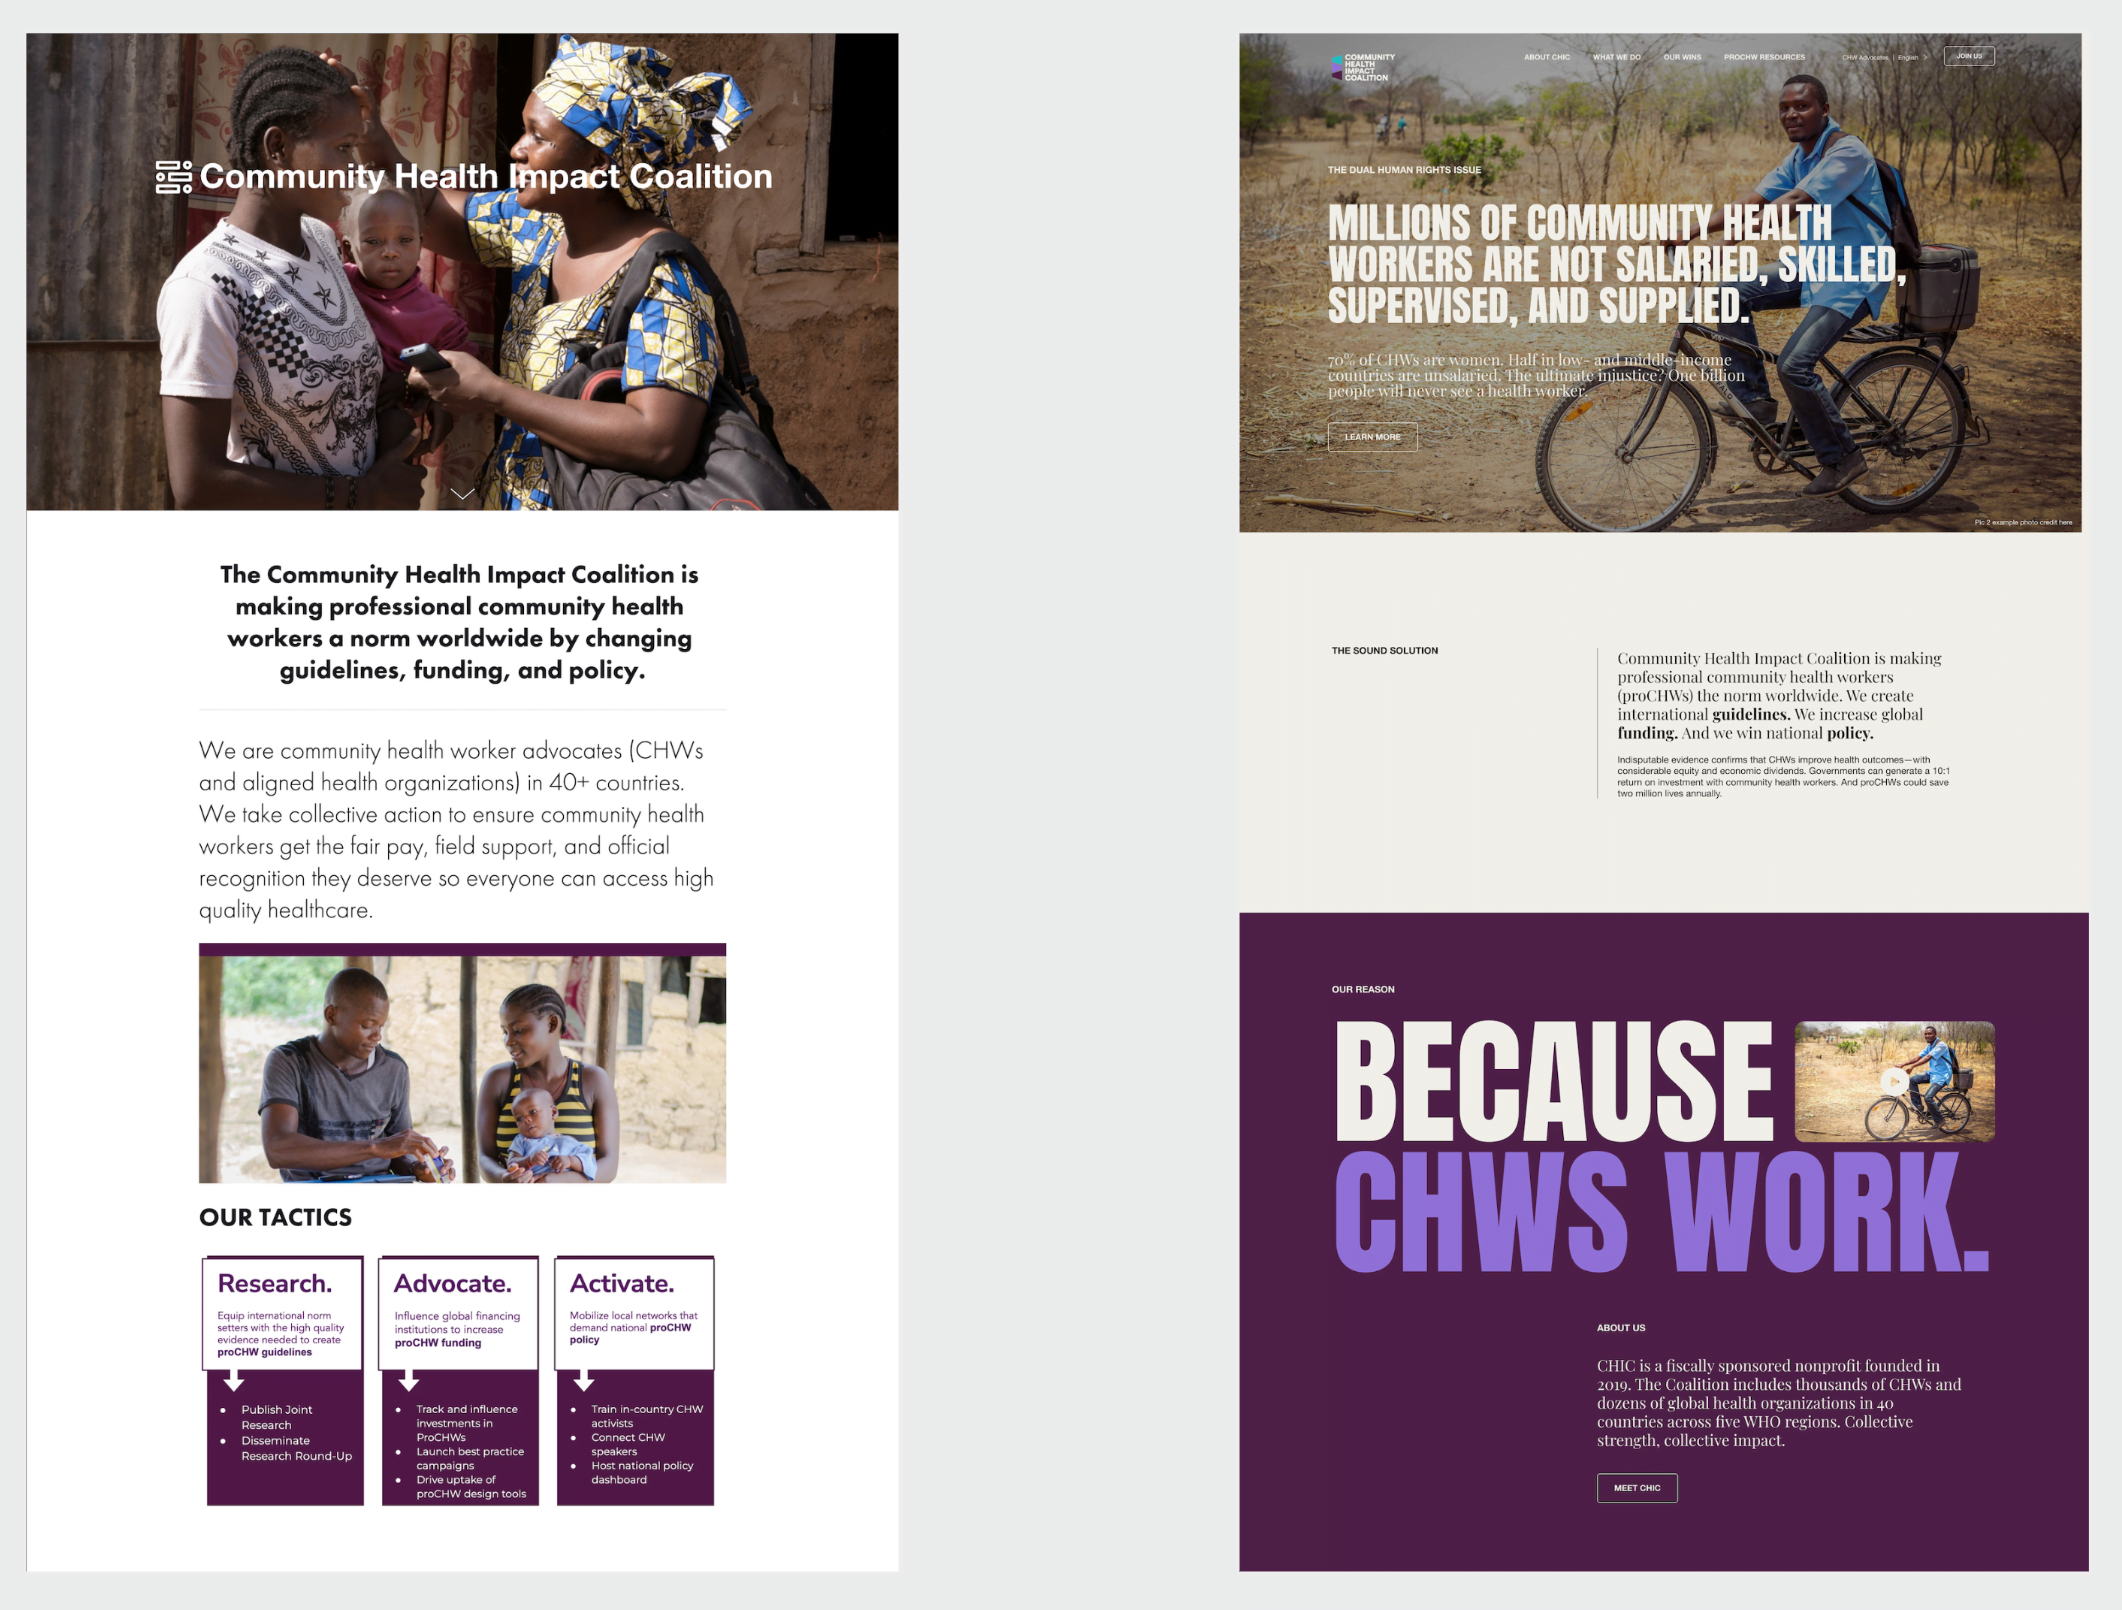 Side-by-side comparison of the old and new visual identities for Community Health Impact Coalition (CHIC)